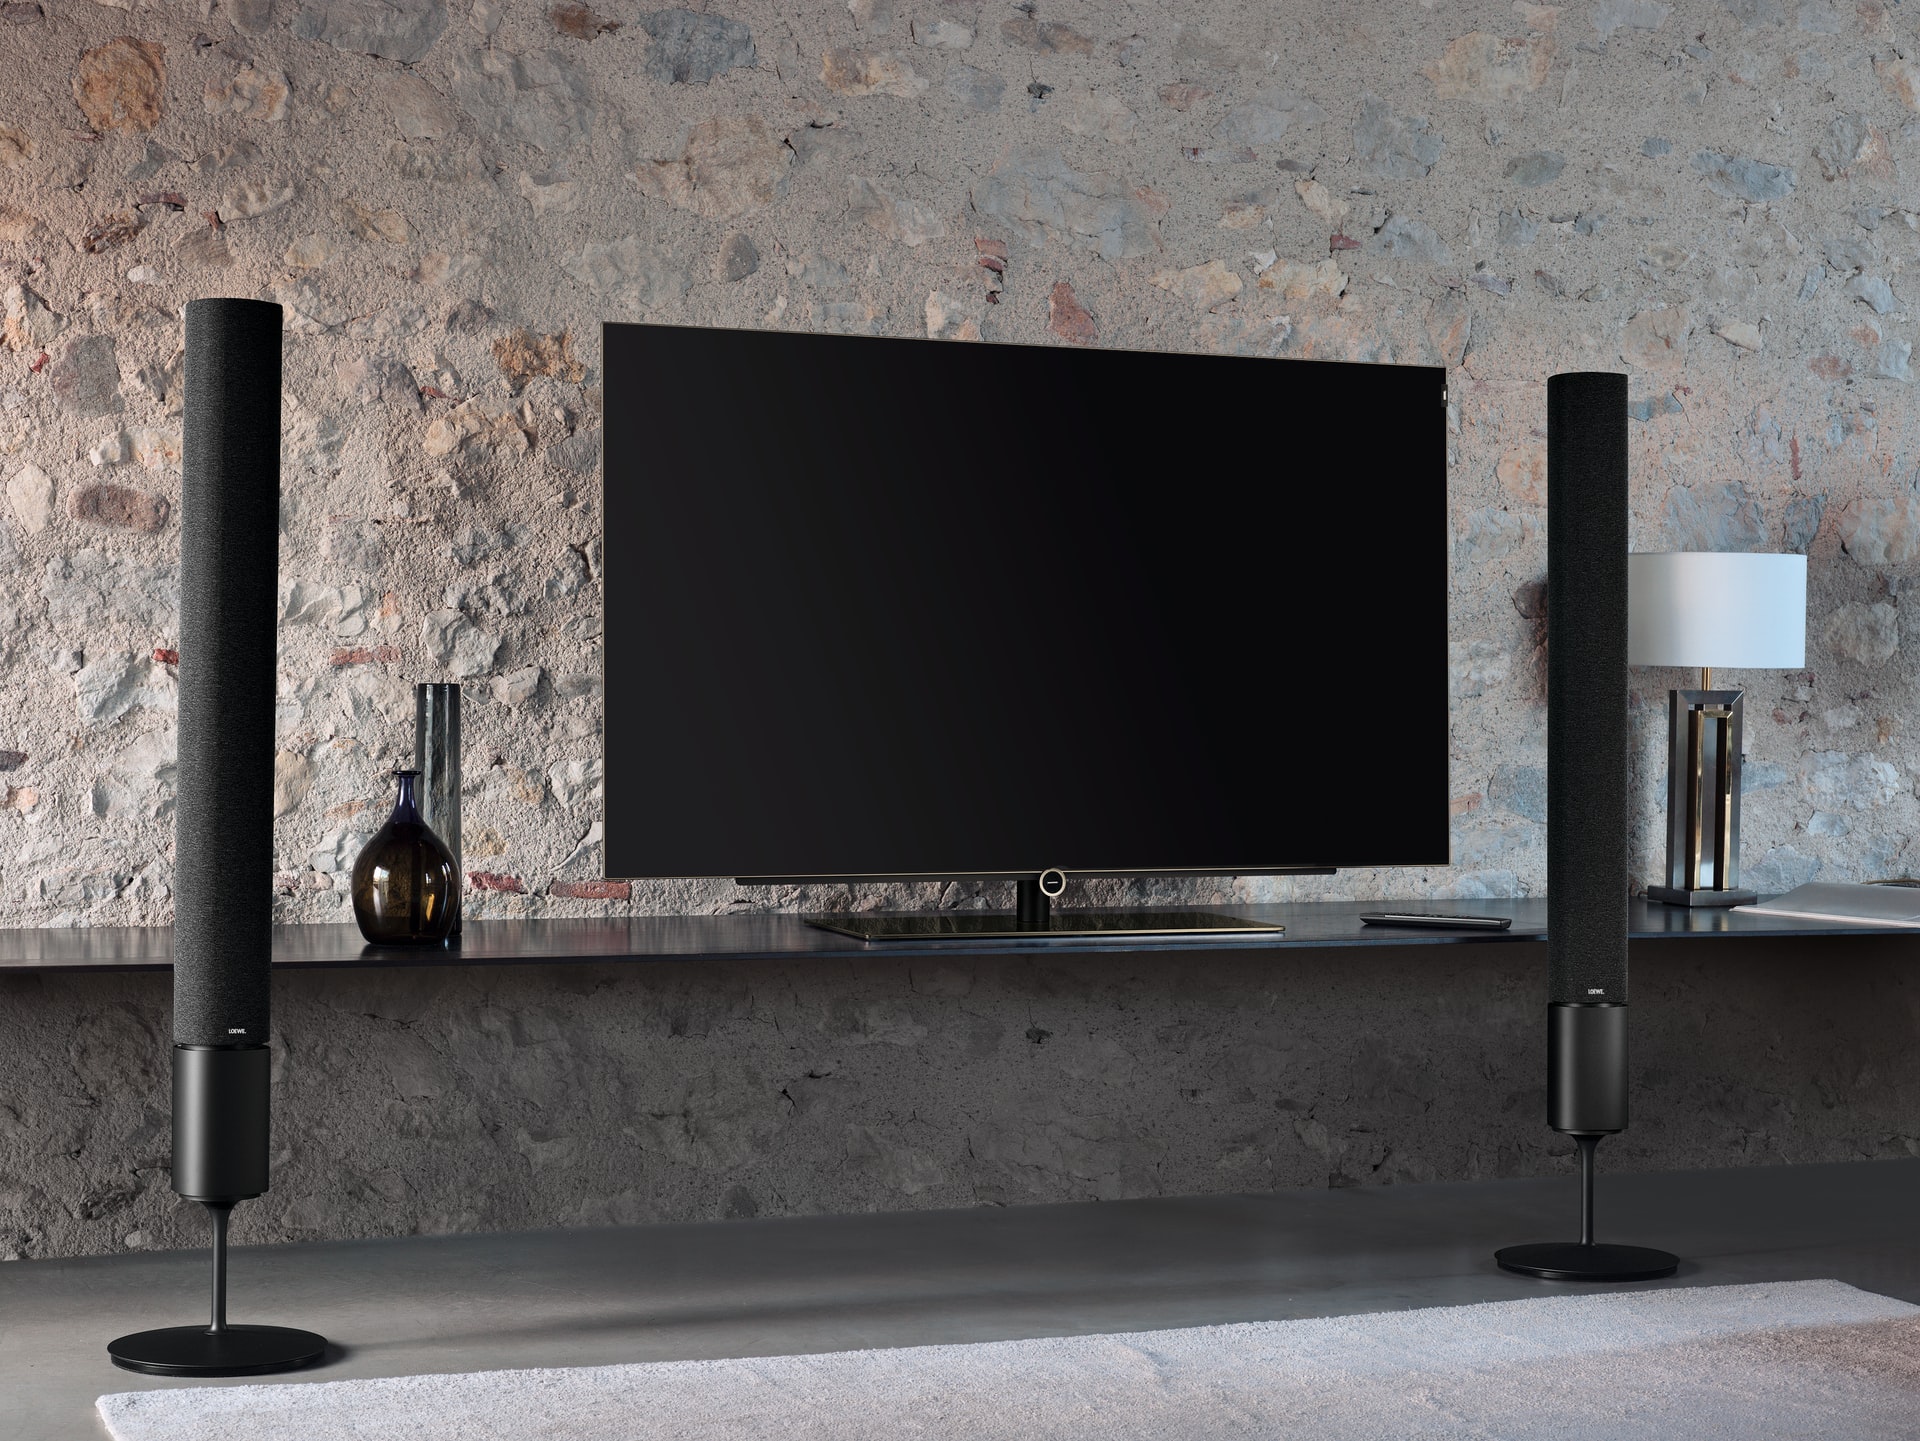 flat screen television with tower speakers